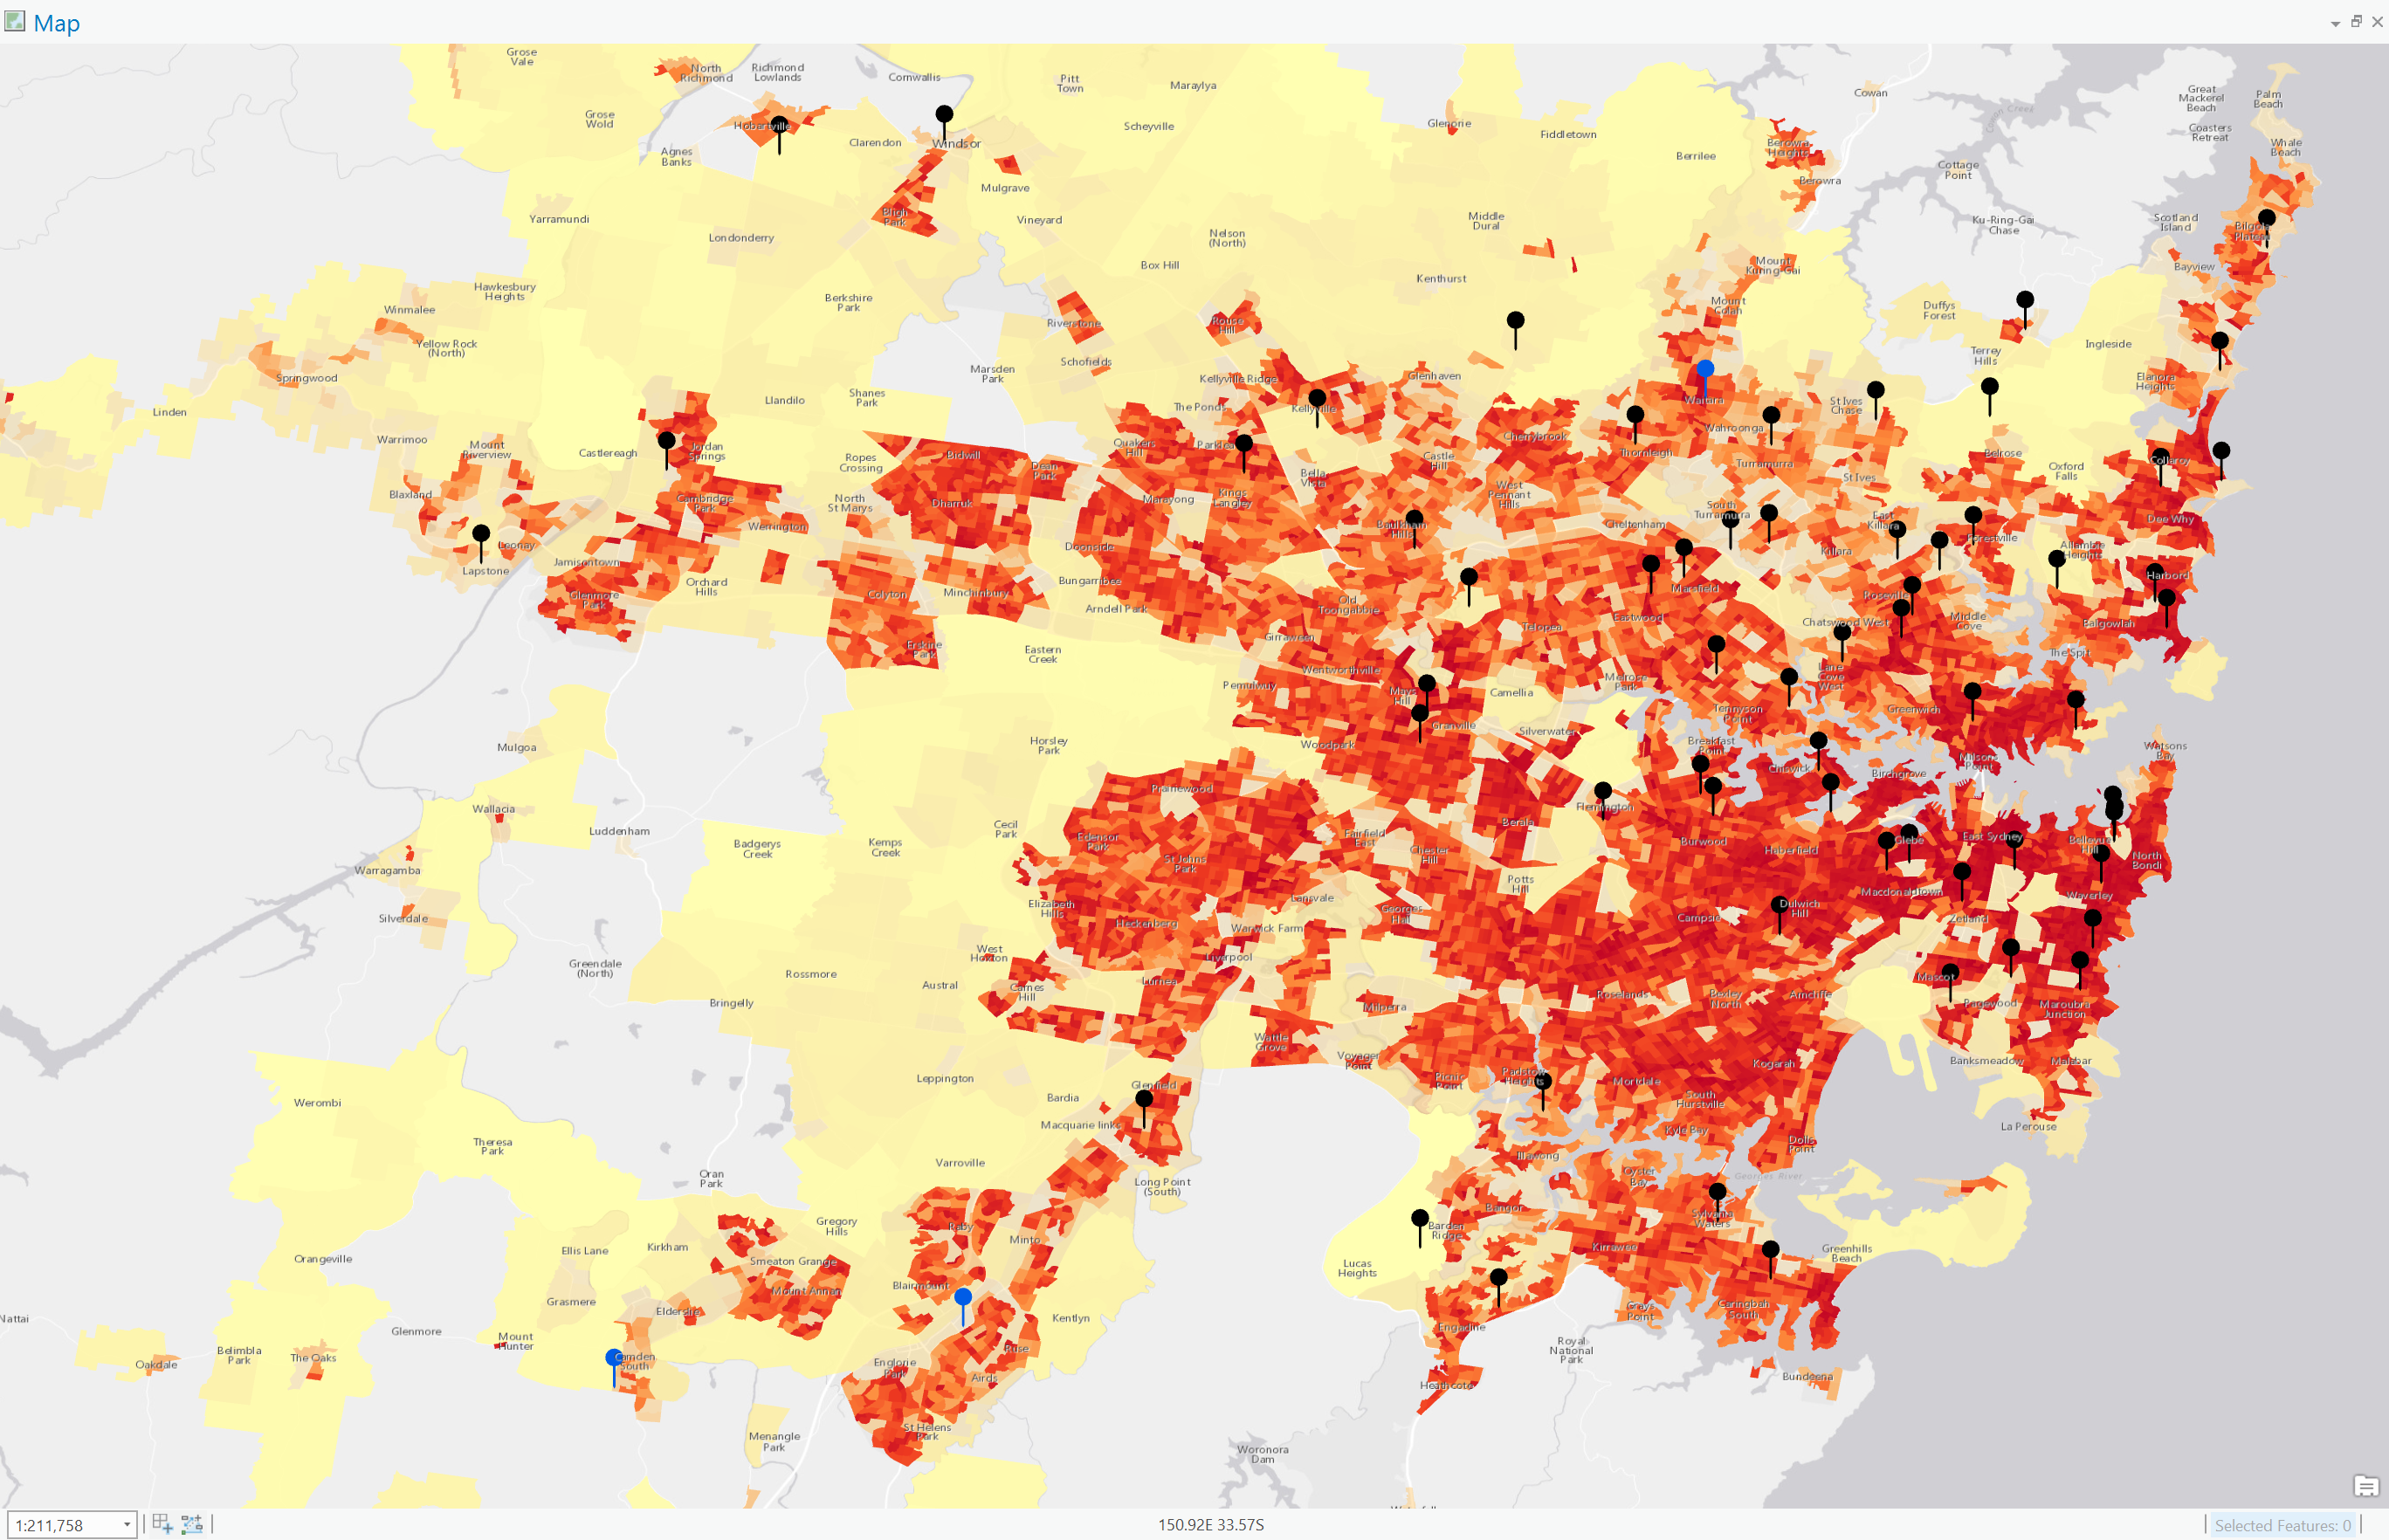 Rugby_PopulationMap-NSW_Seniors-Sydney.png